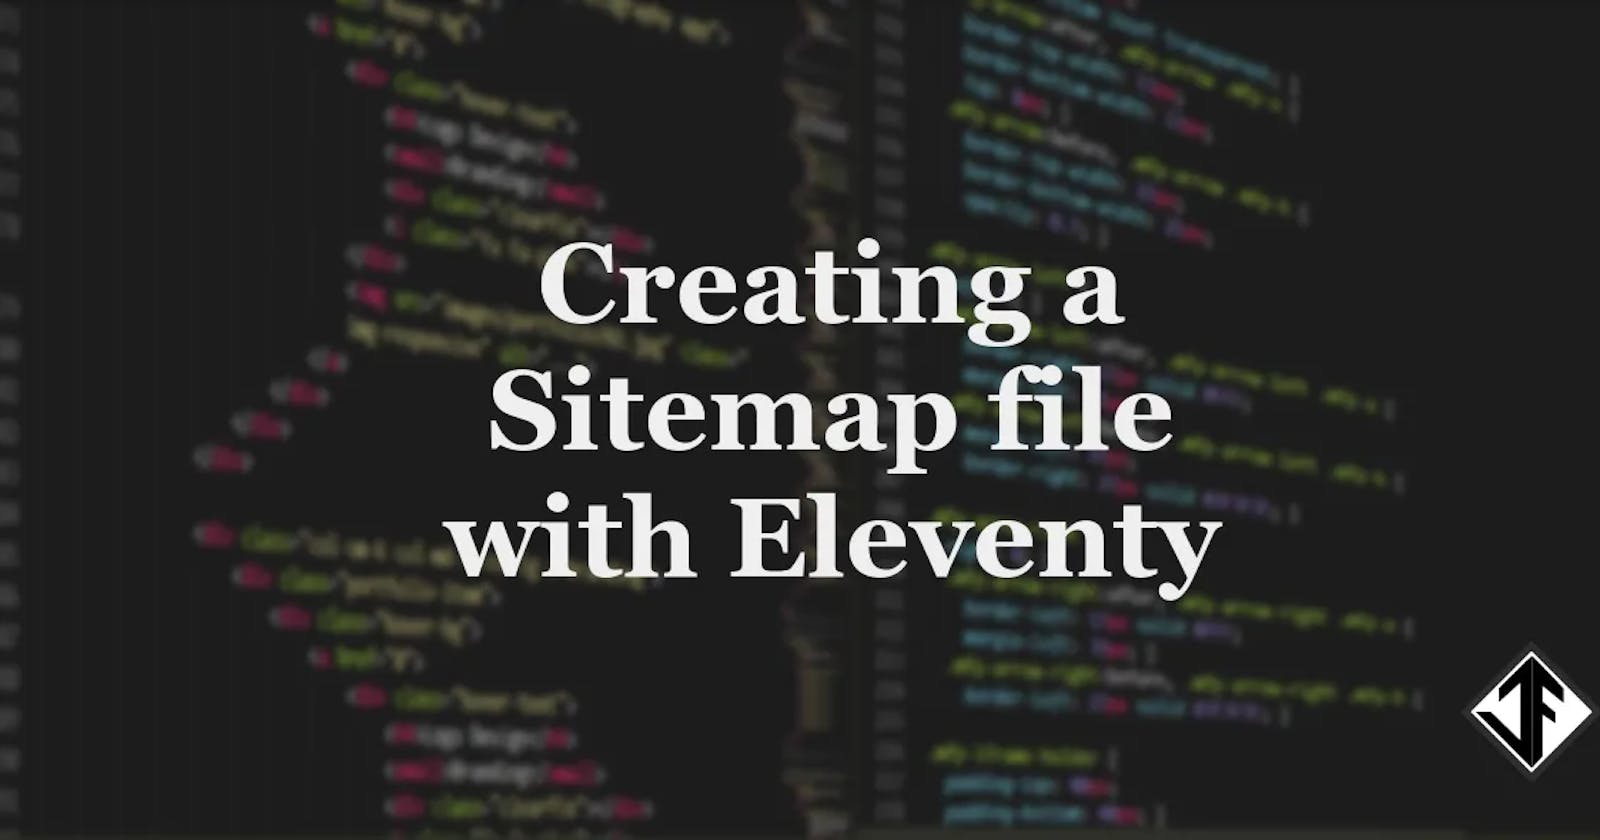 Creating a Sitemap file with Eleventy